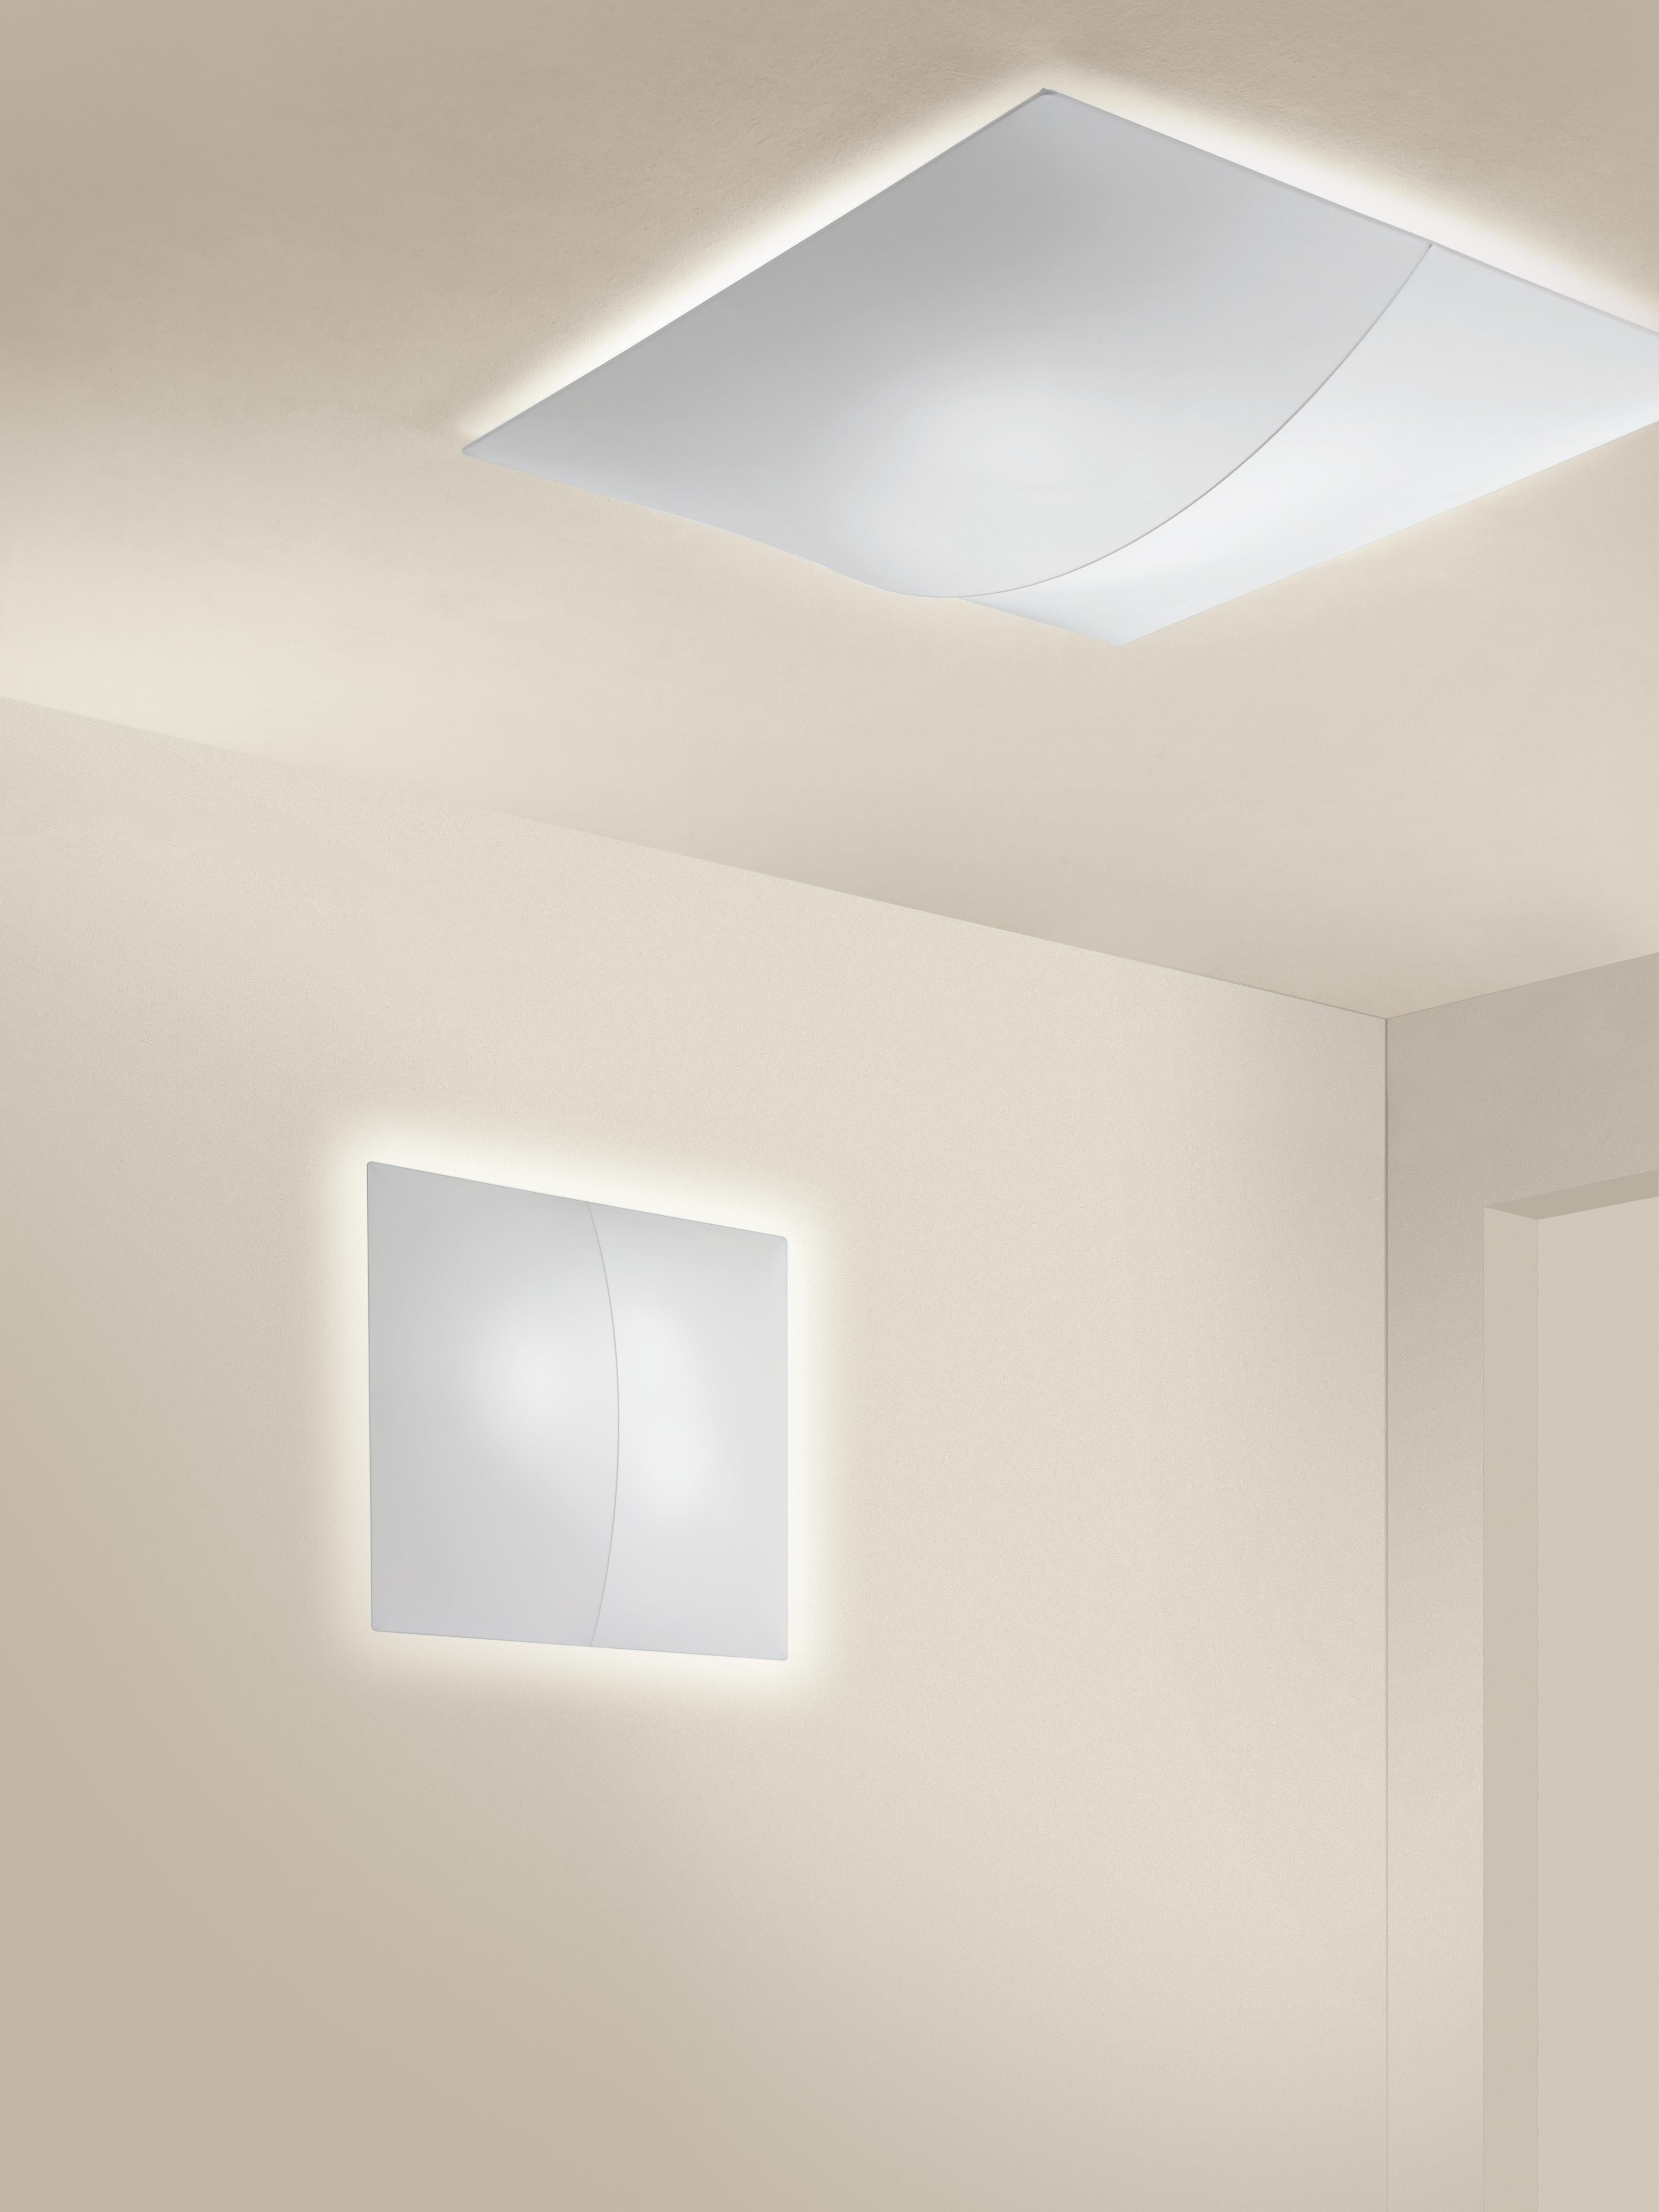 Axolight Medium 60 Nelly Wall Lamp in White Pattern by Manuel & Vanessa Vivian

Geometric simplicity and a discreet game of light and shade. Nelly is the purity of a white canvas interrupted by a linear trace that gently crosses it, emphasizing